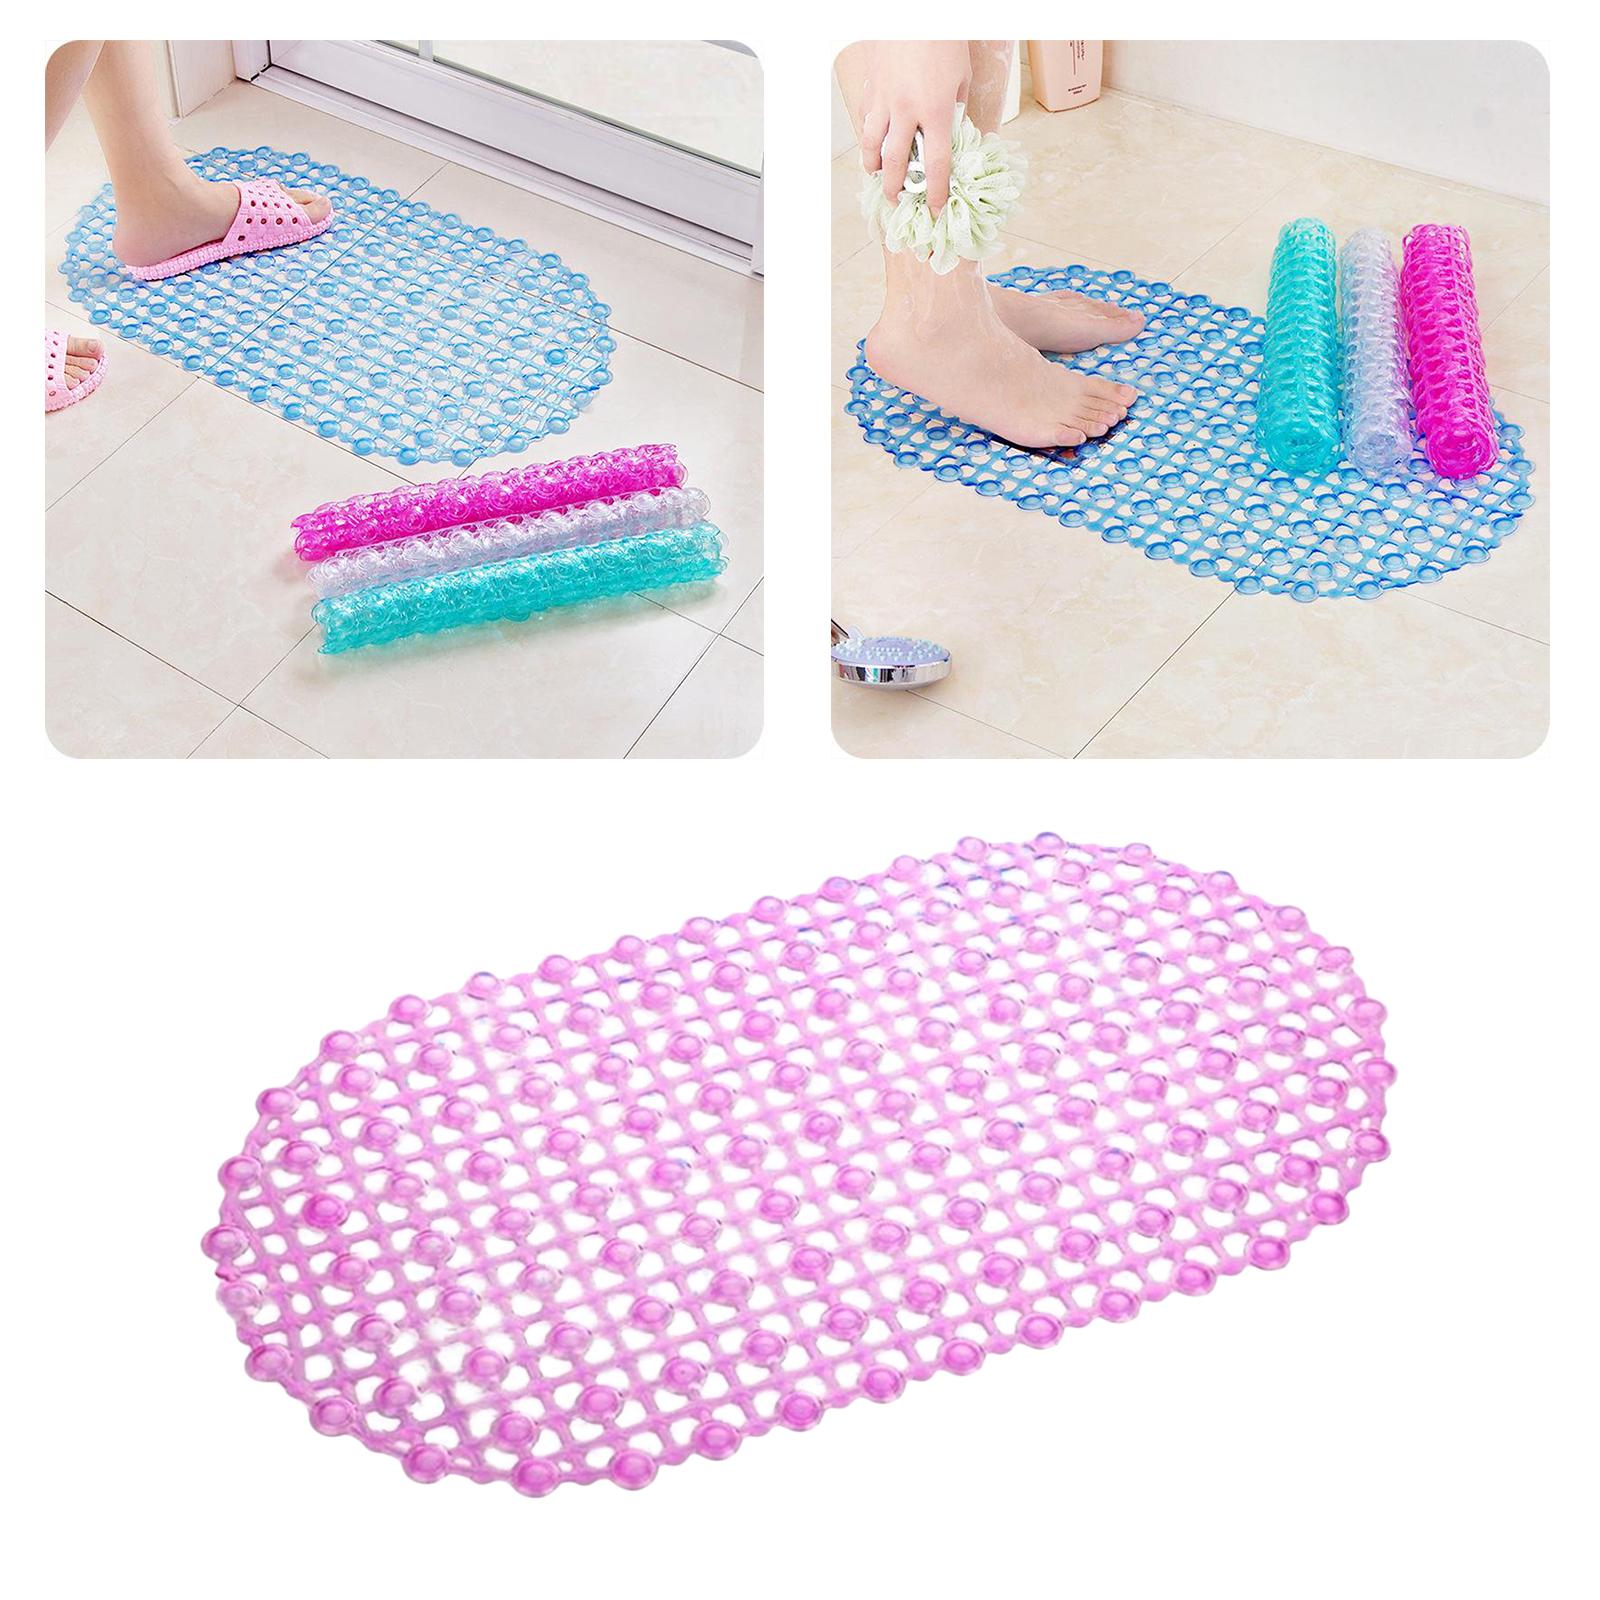 Kodaily Non Slip Bath Mat for Bathroom Pebble Frosted Anti-Mould Shower Mat